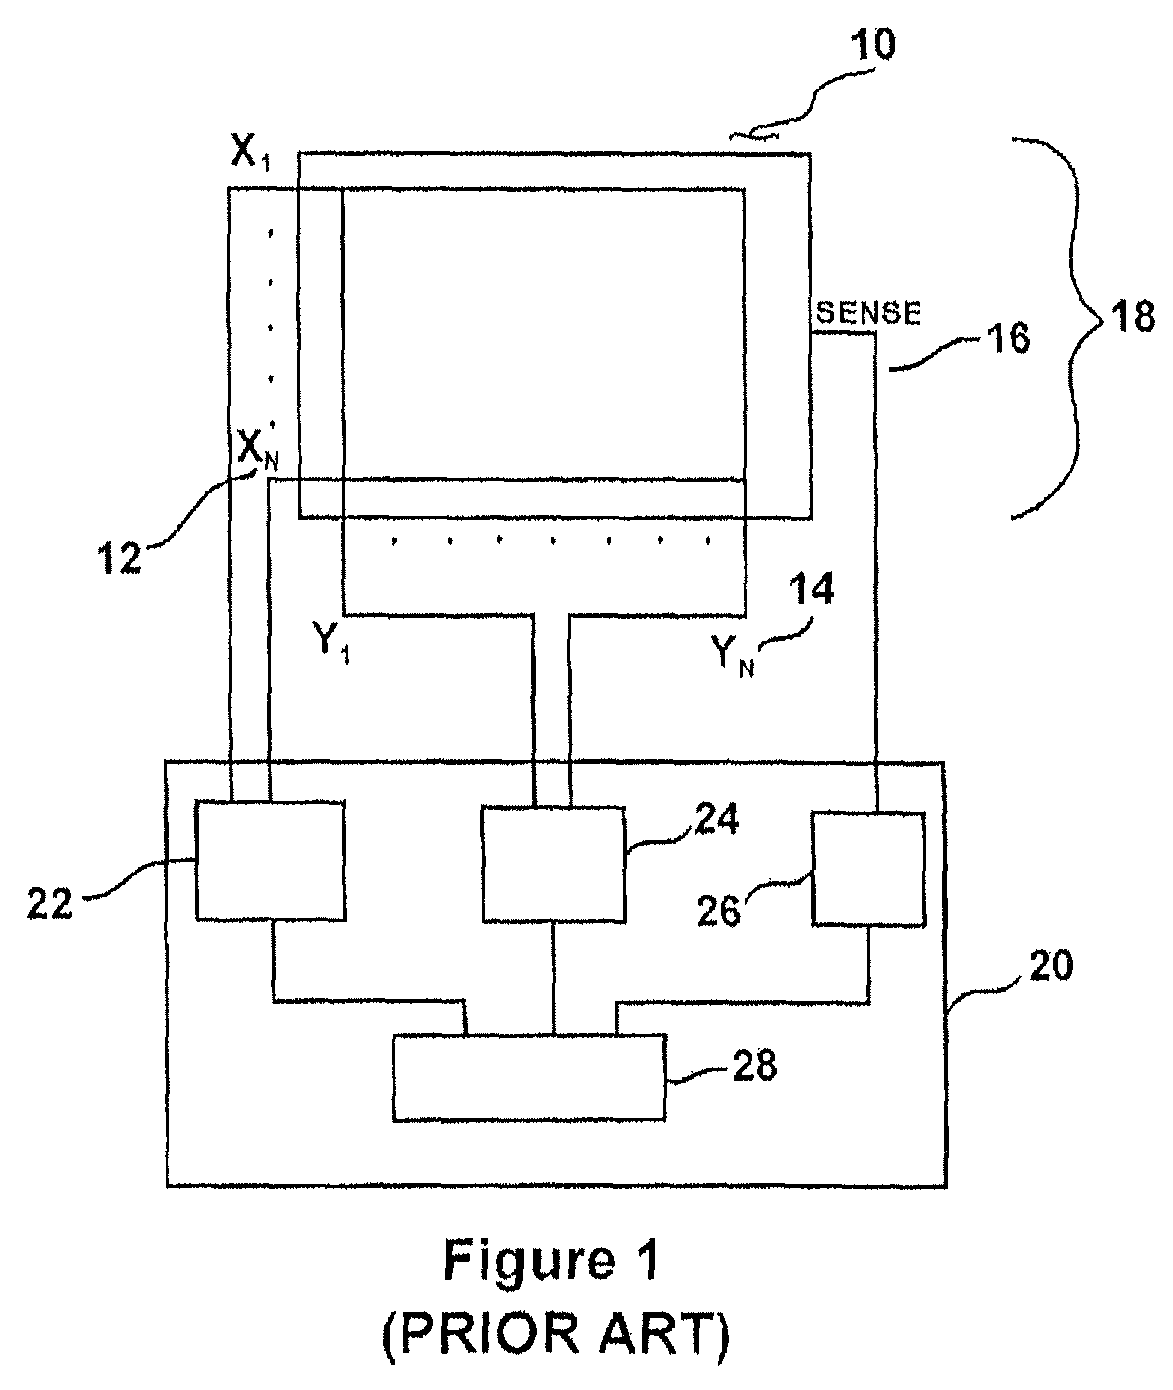 Touchpad combined with a display and having proximity and touch sensing capabilities to enable different functions or interfaces to be displayed